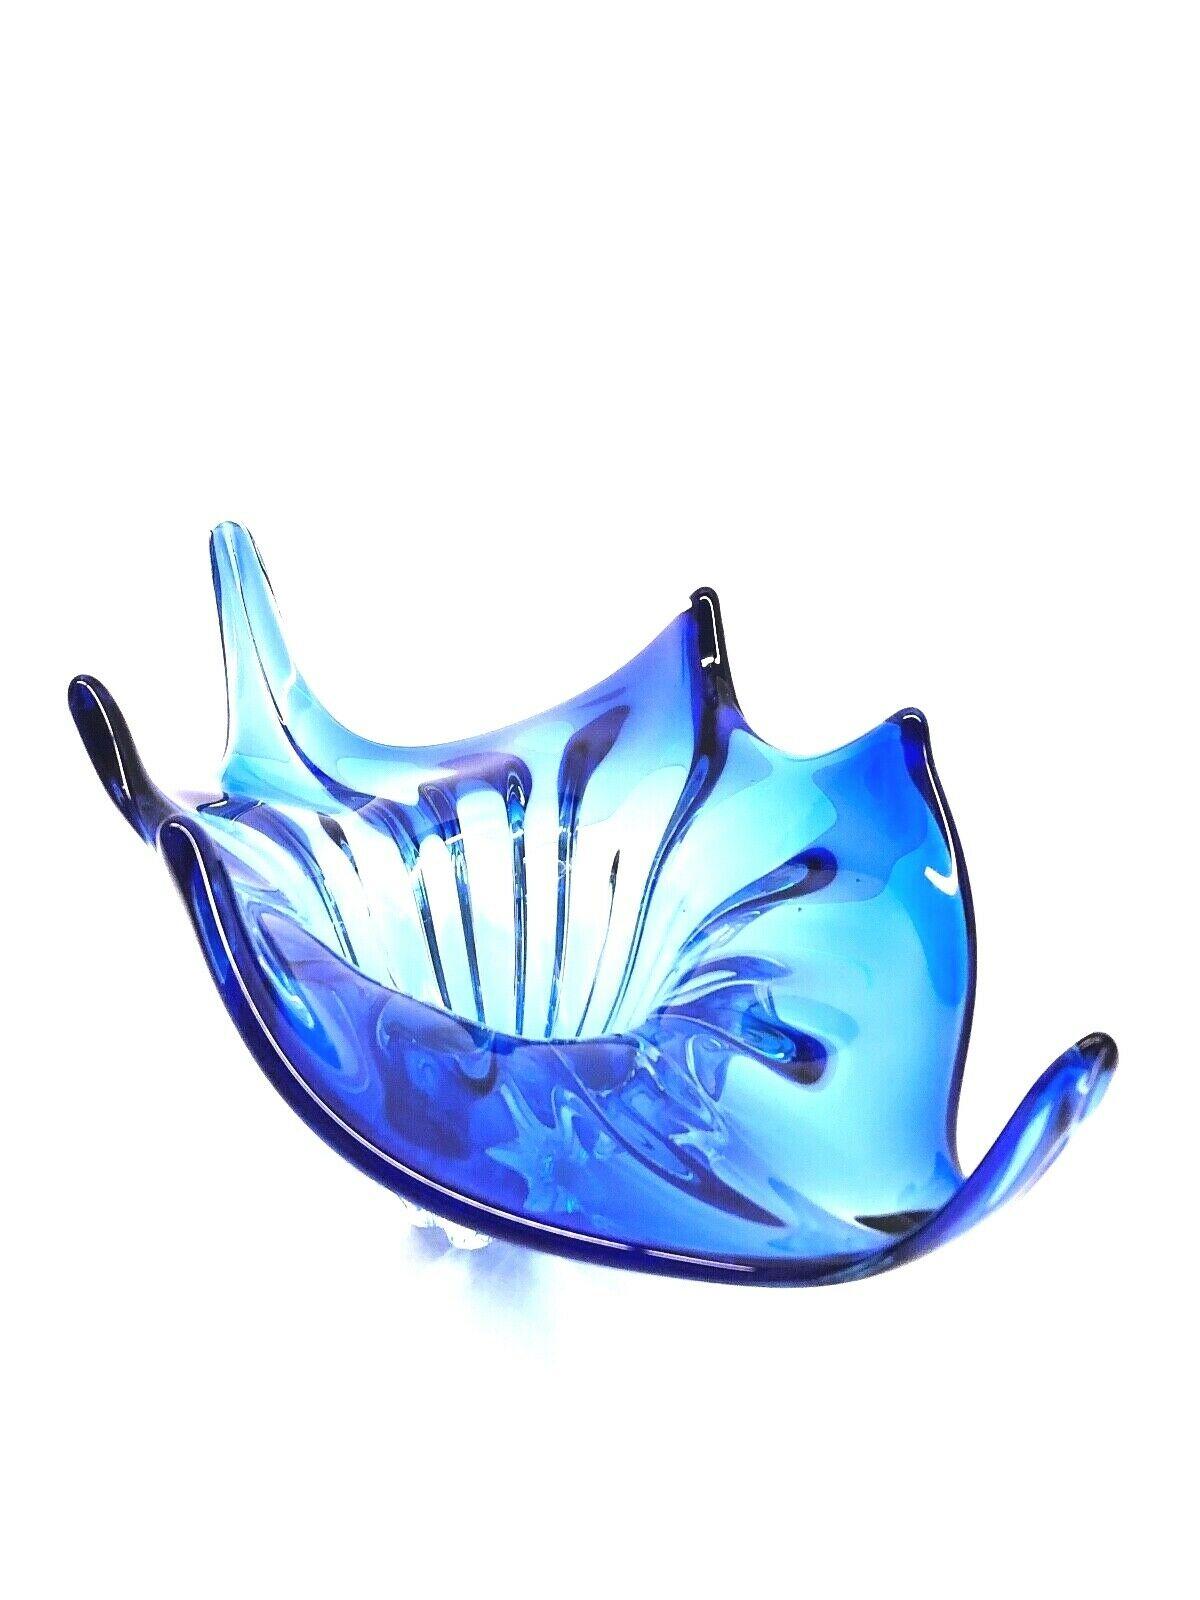 An amazing Venetian Murano glass bowl in a nice royal blue and clear color. A highly decorative piece useful as centre piece or bowl, candy bowl or fruit bowl, Italy, 1970s.